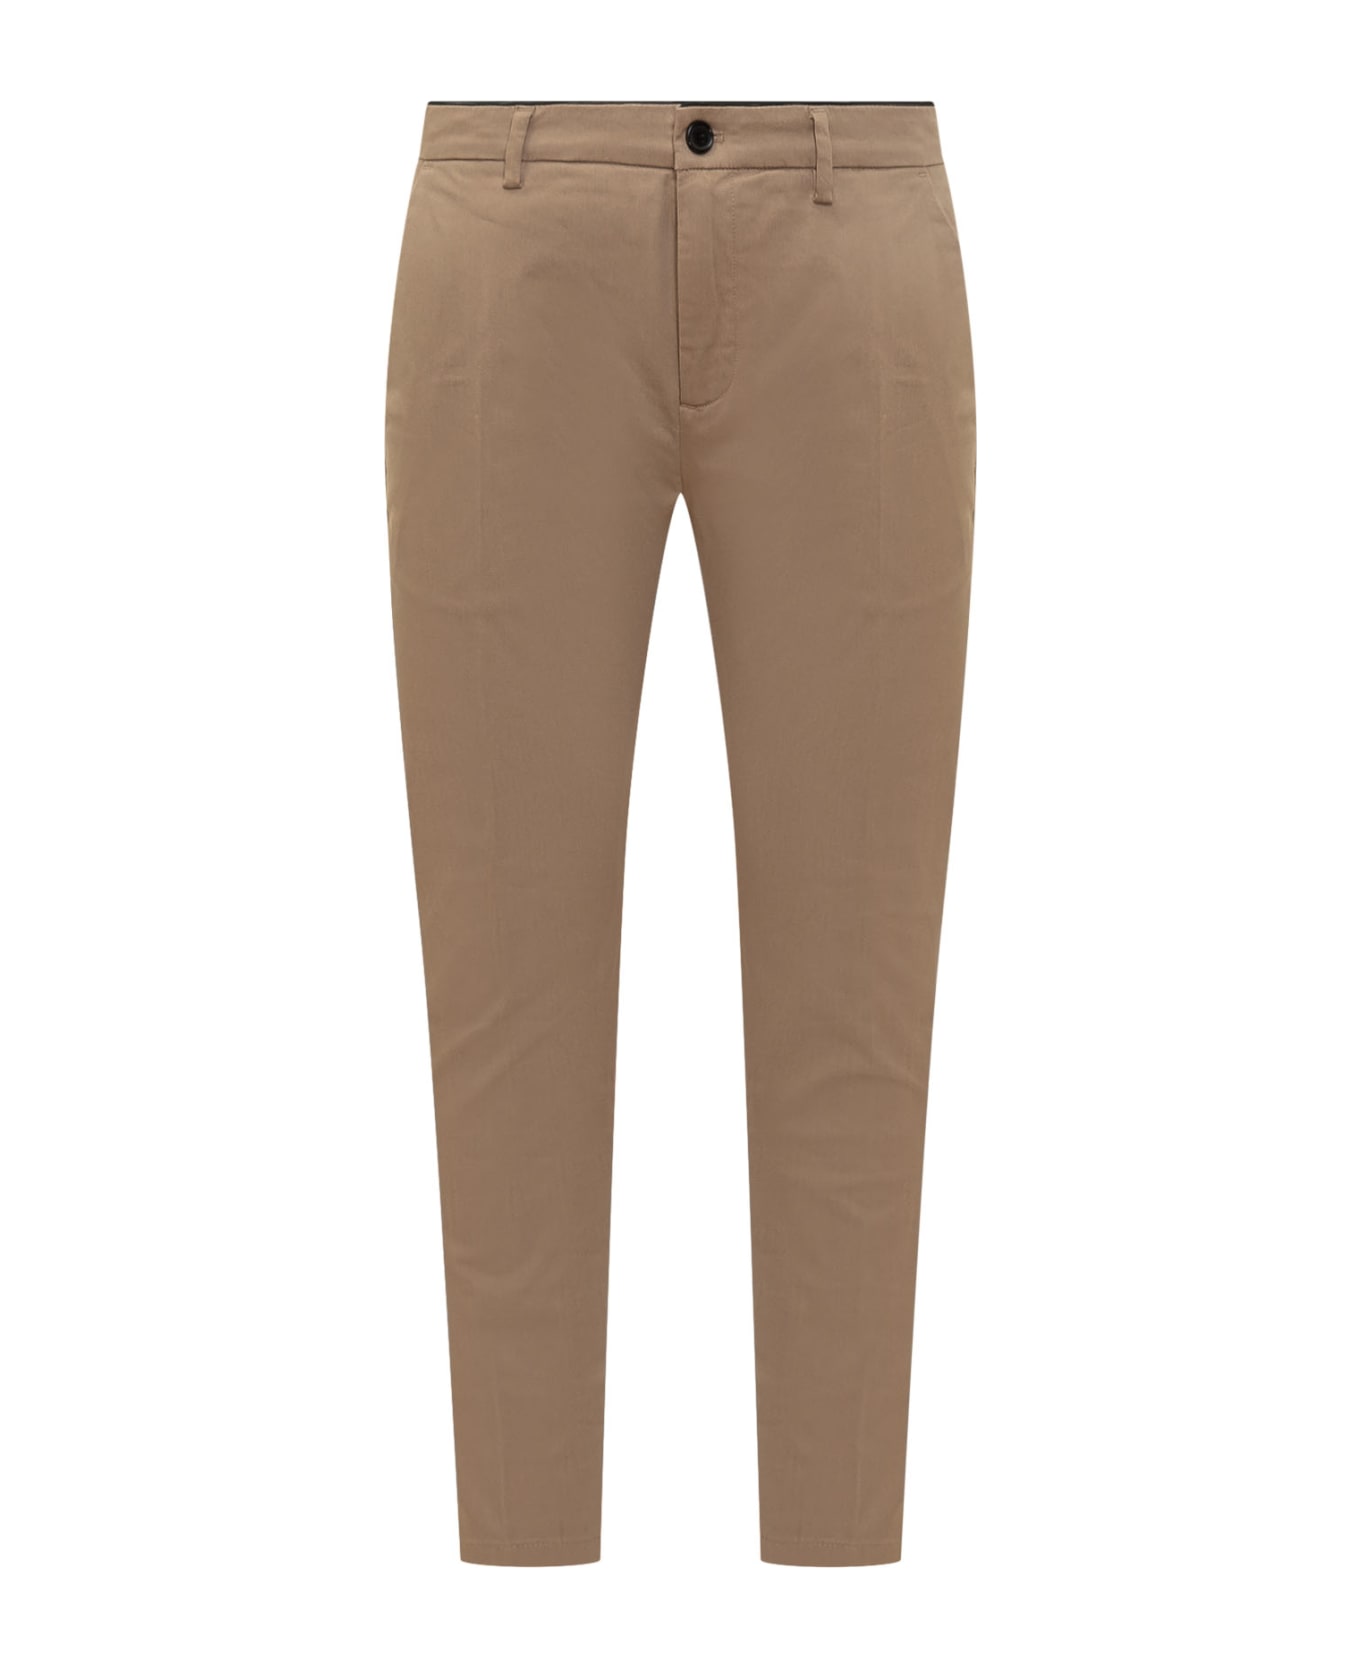 Department Five Prince Chino Pants - BEIGE